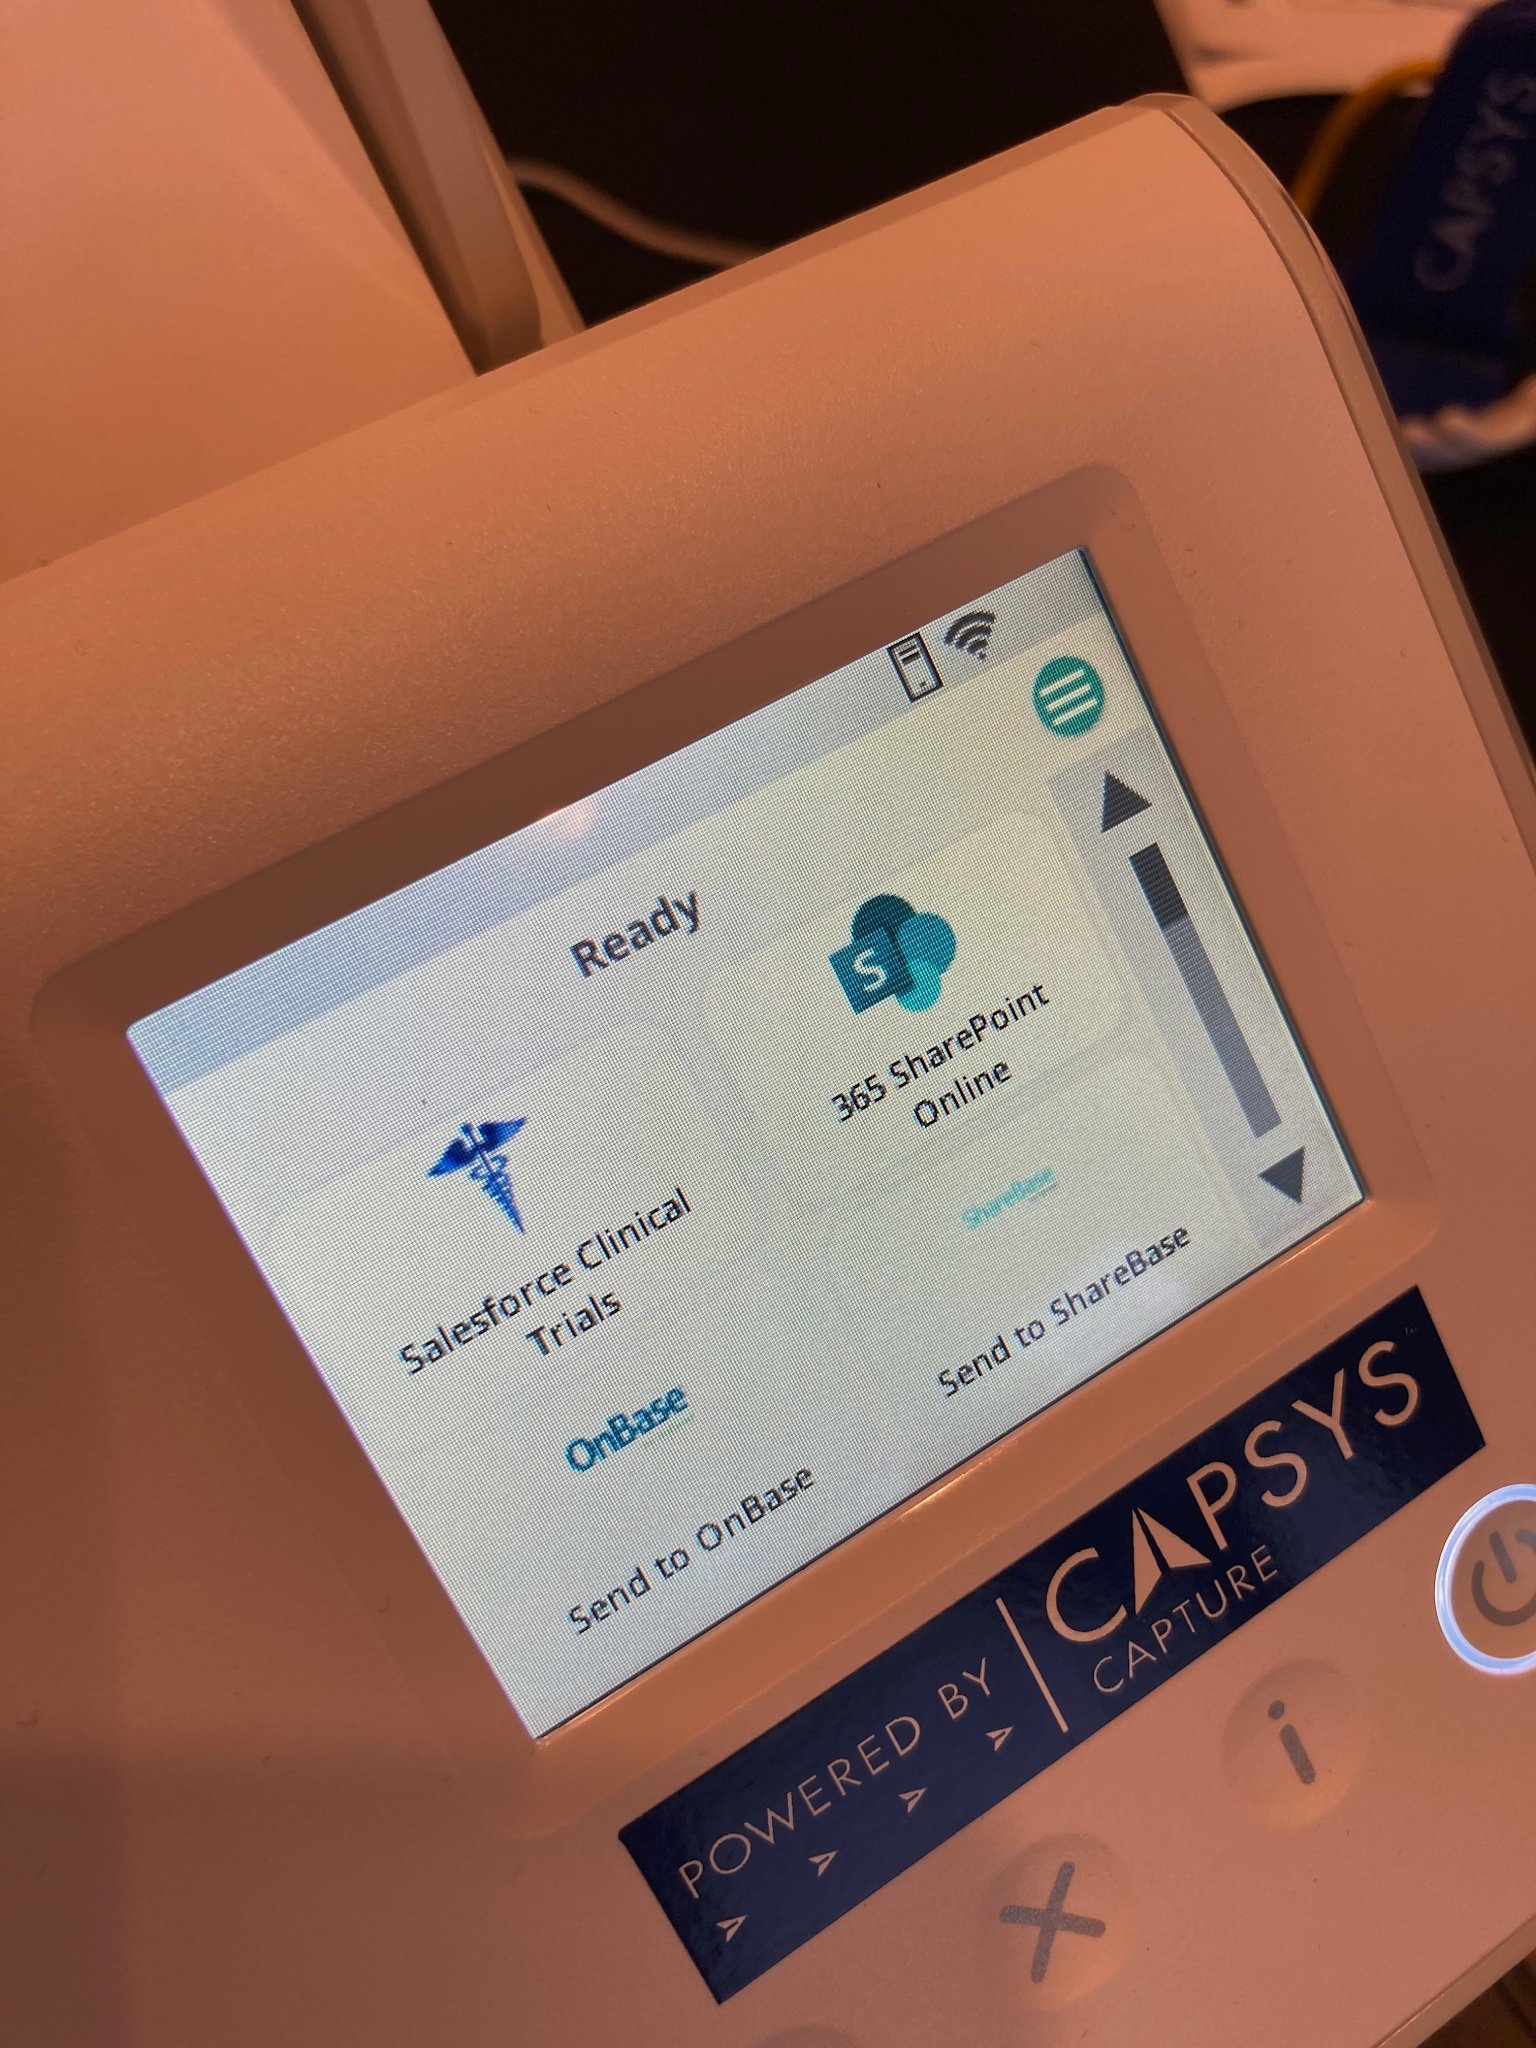 IoT Smart Connected Scanning for Salesforce CRM